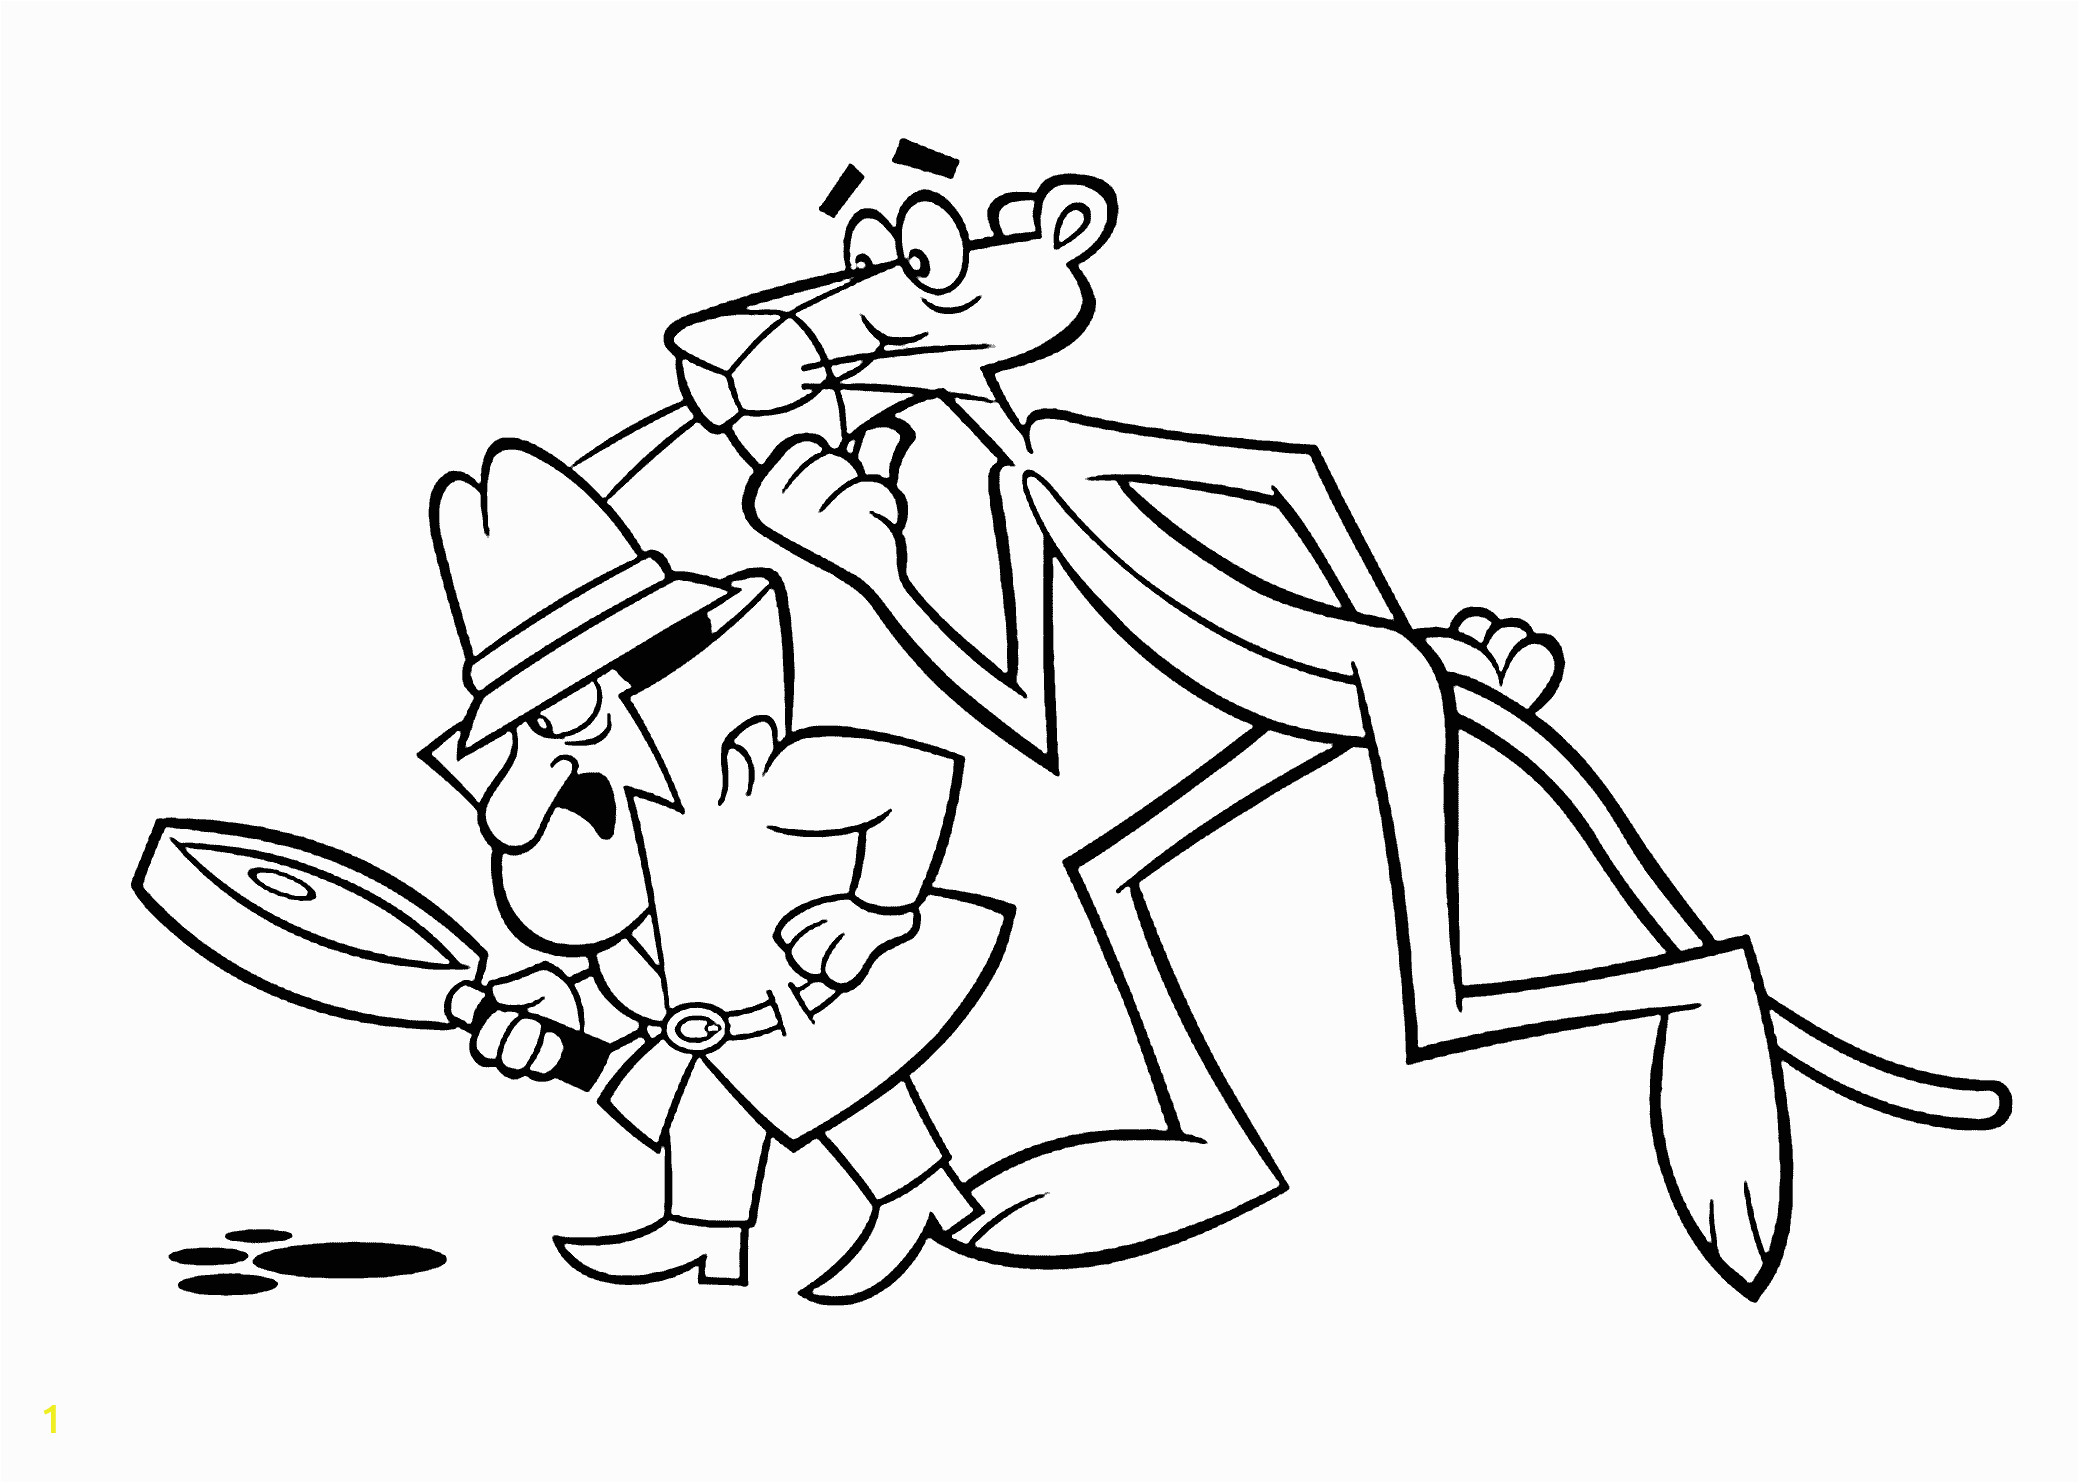 Pink Panther Coloring Pages Free Pink Panther and Detective Coloring Pages for Kids